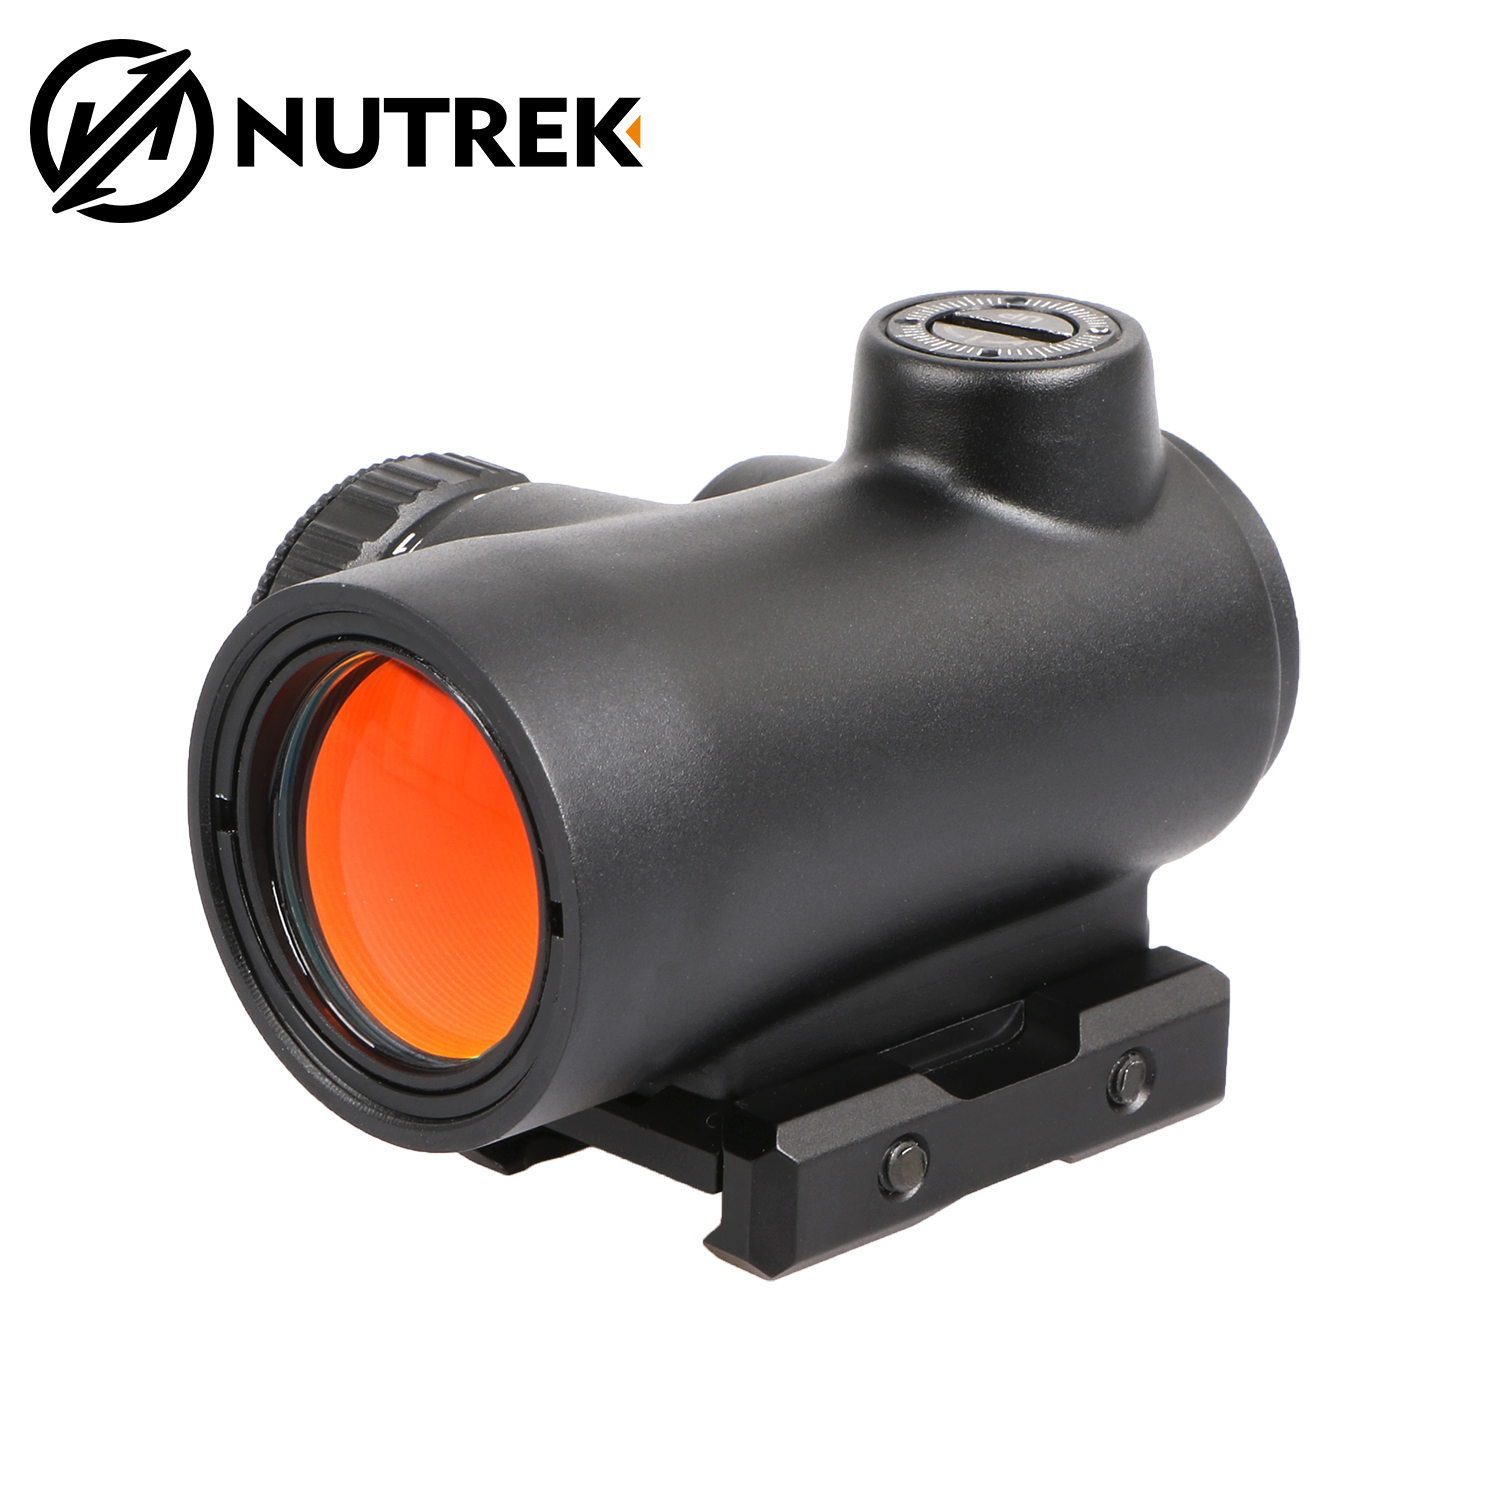 Getting the Right Red Dot Sight for yourself